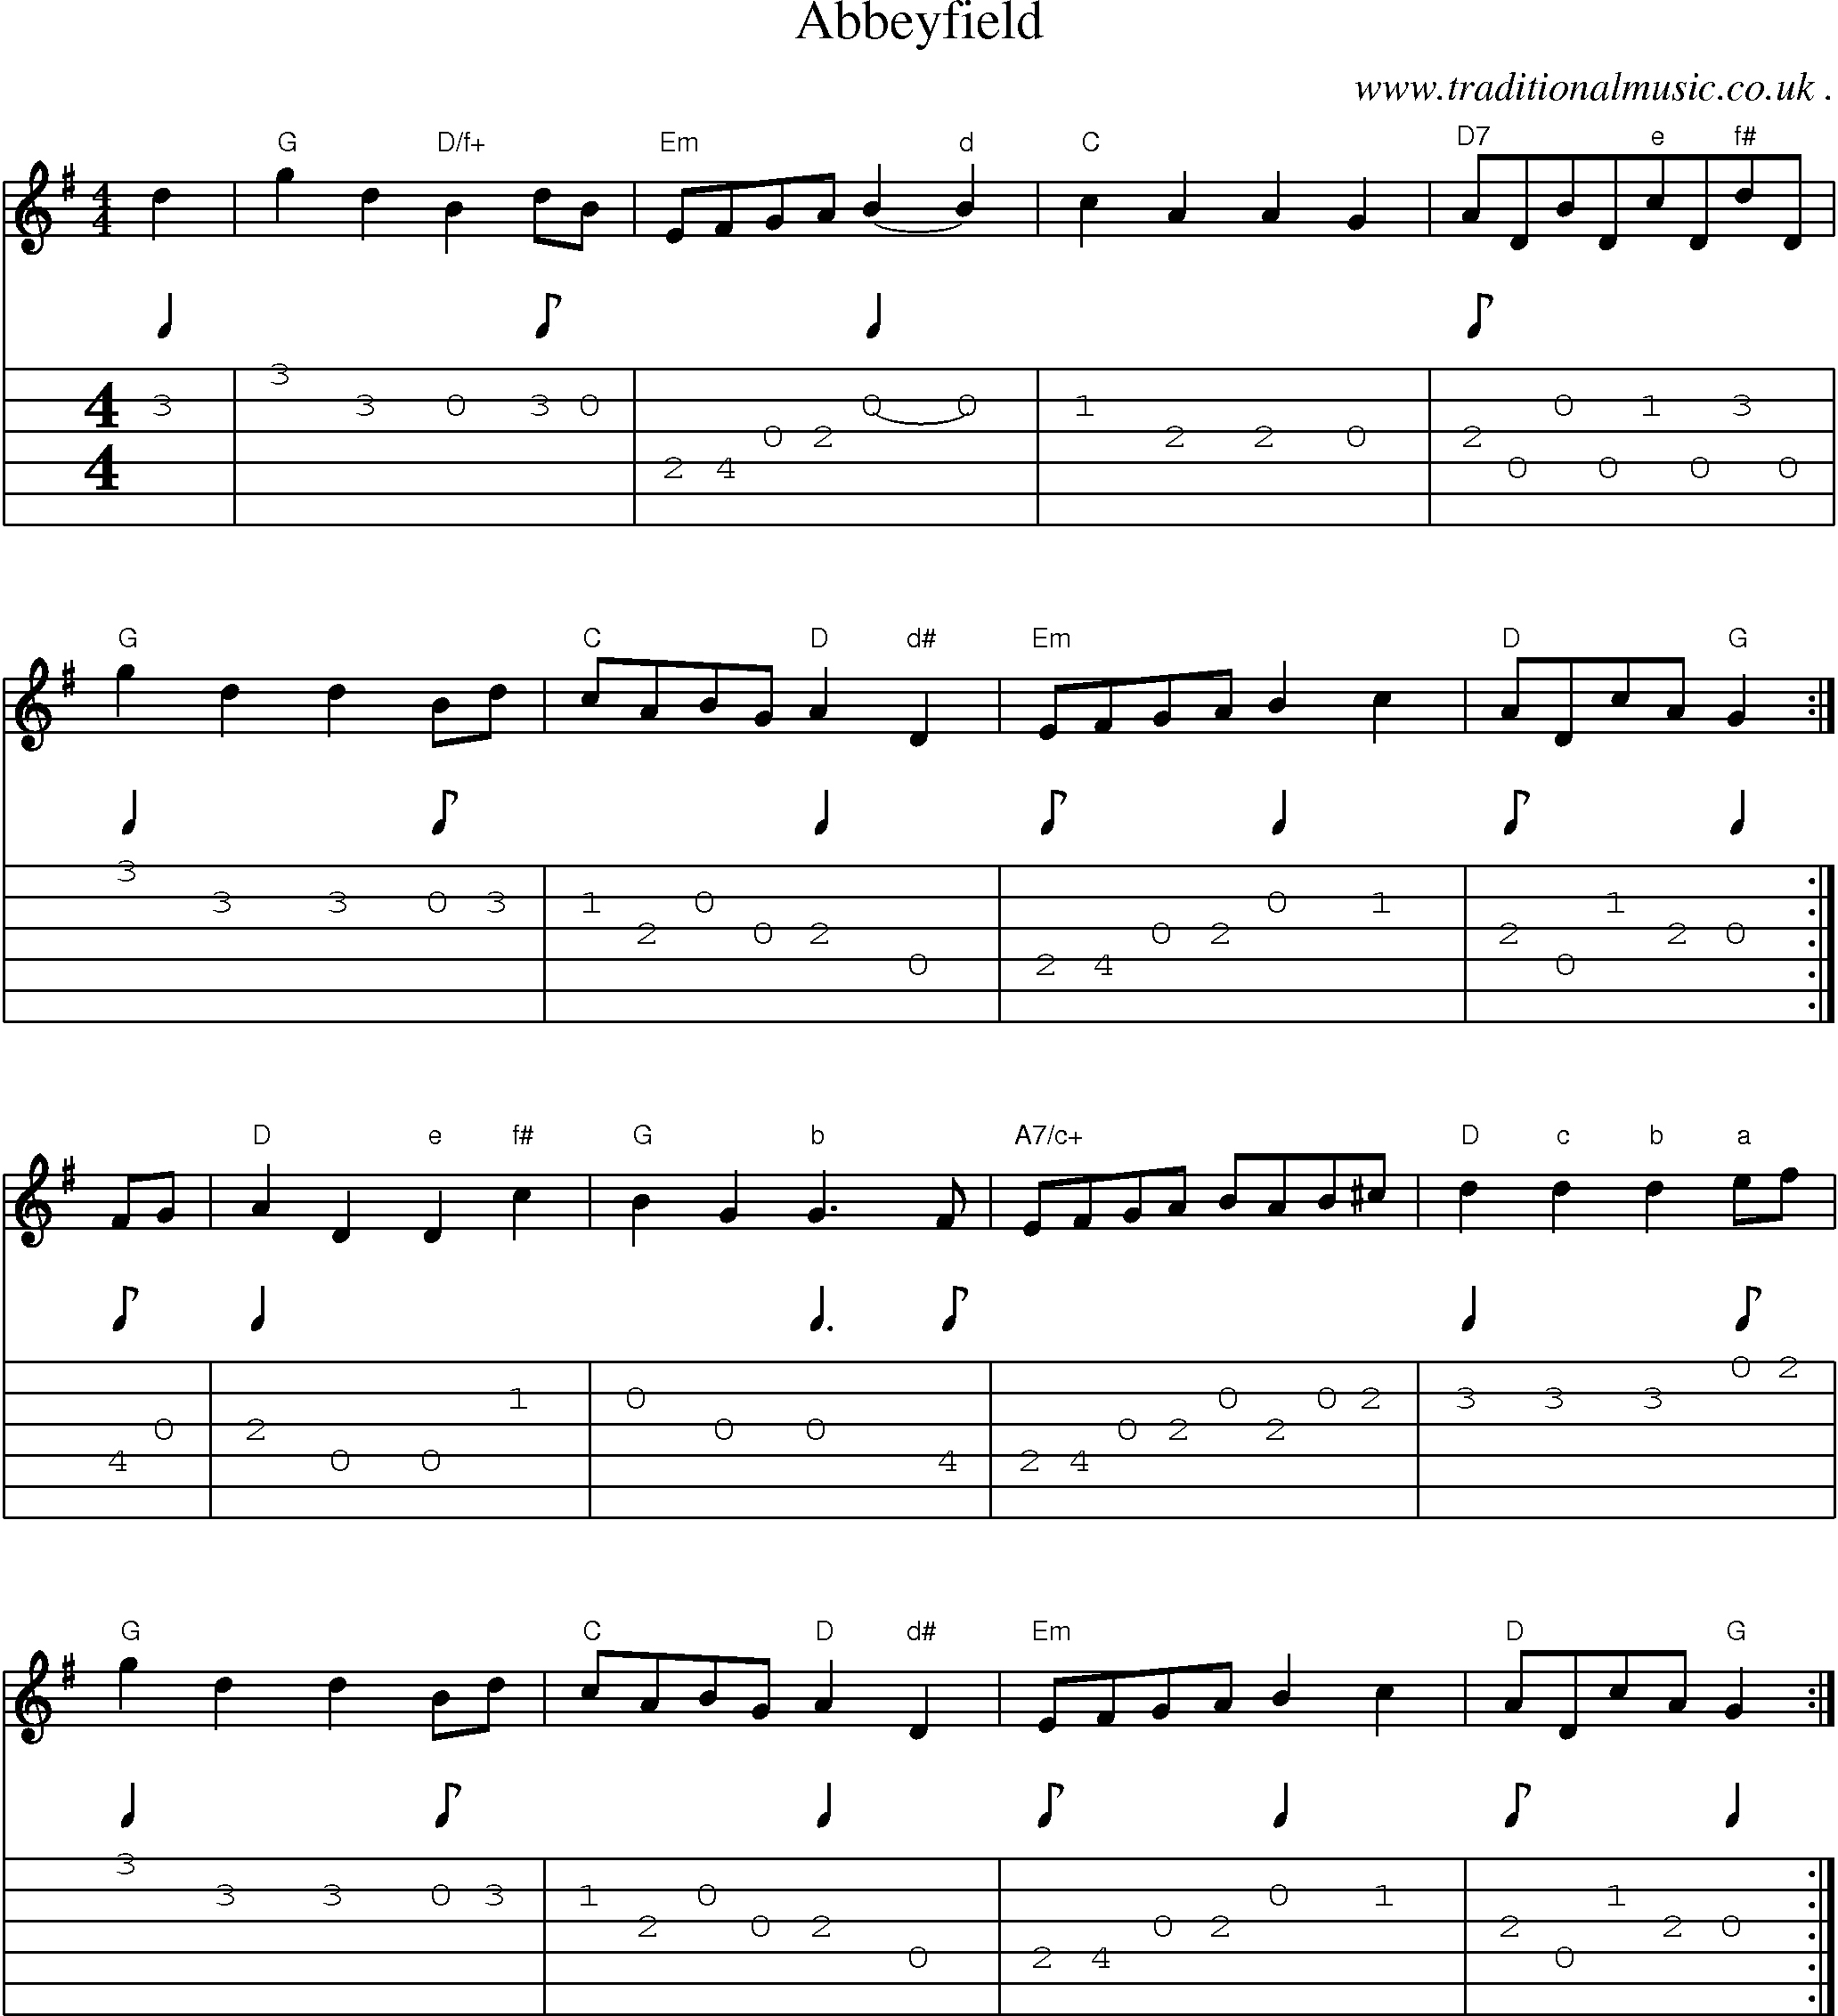 Sheet-Music and Guitar Tabs for Abbeyfield